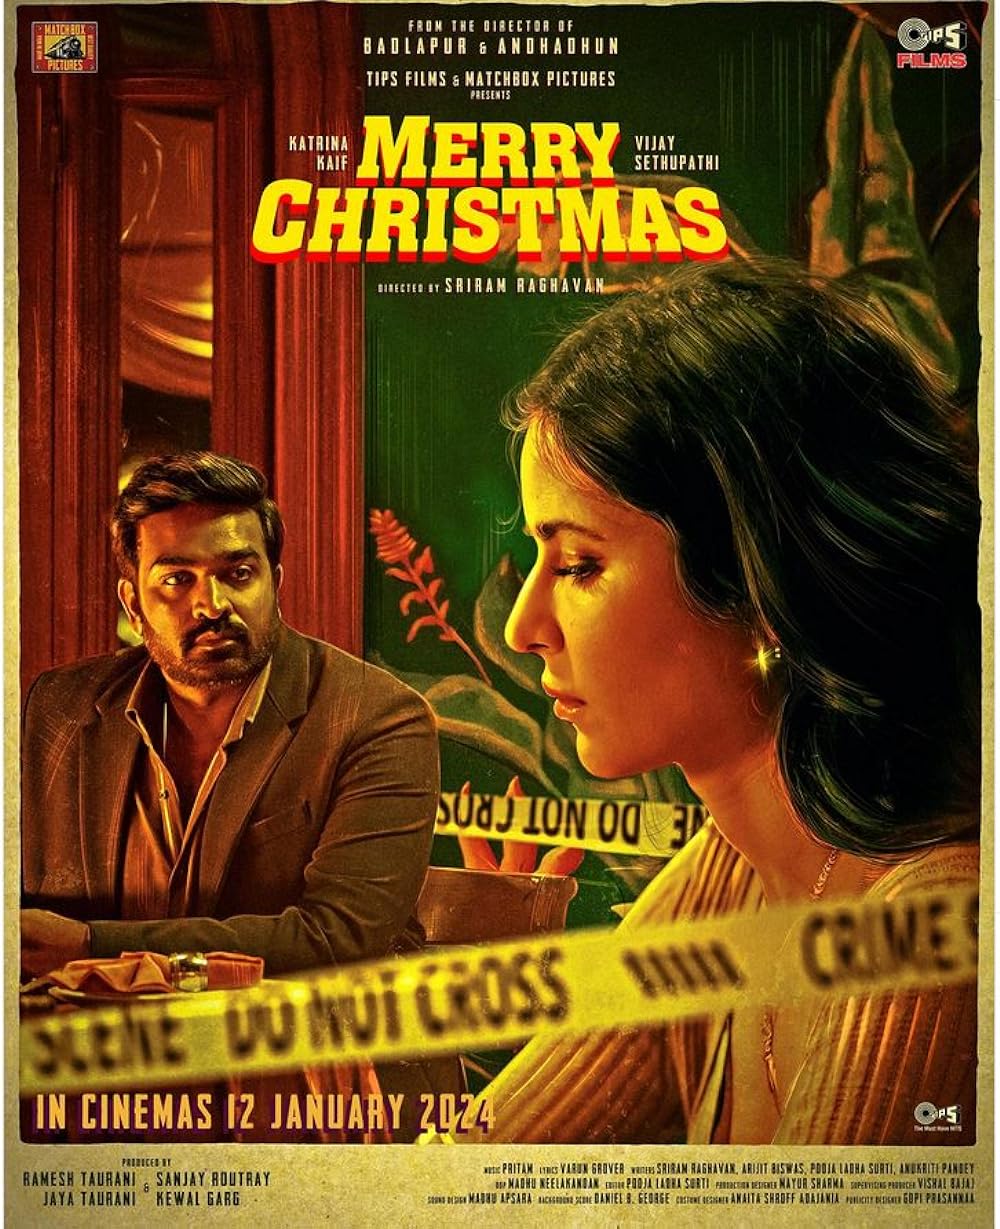 Merry Christmas (March 8)- Streaming on Netflix